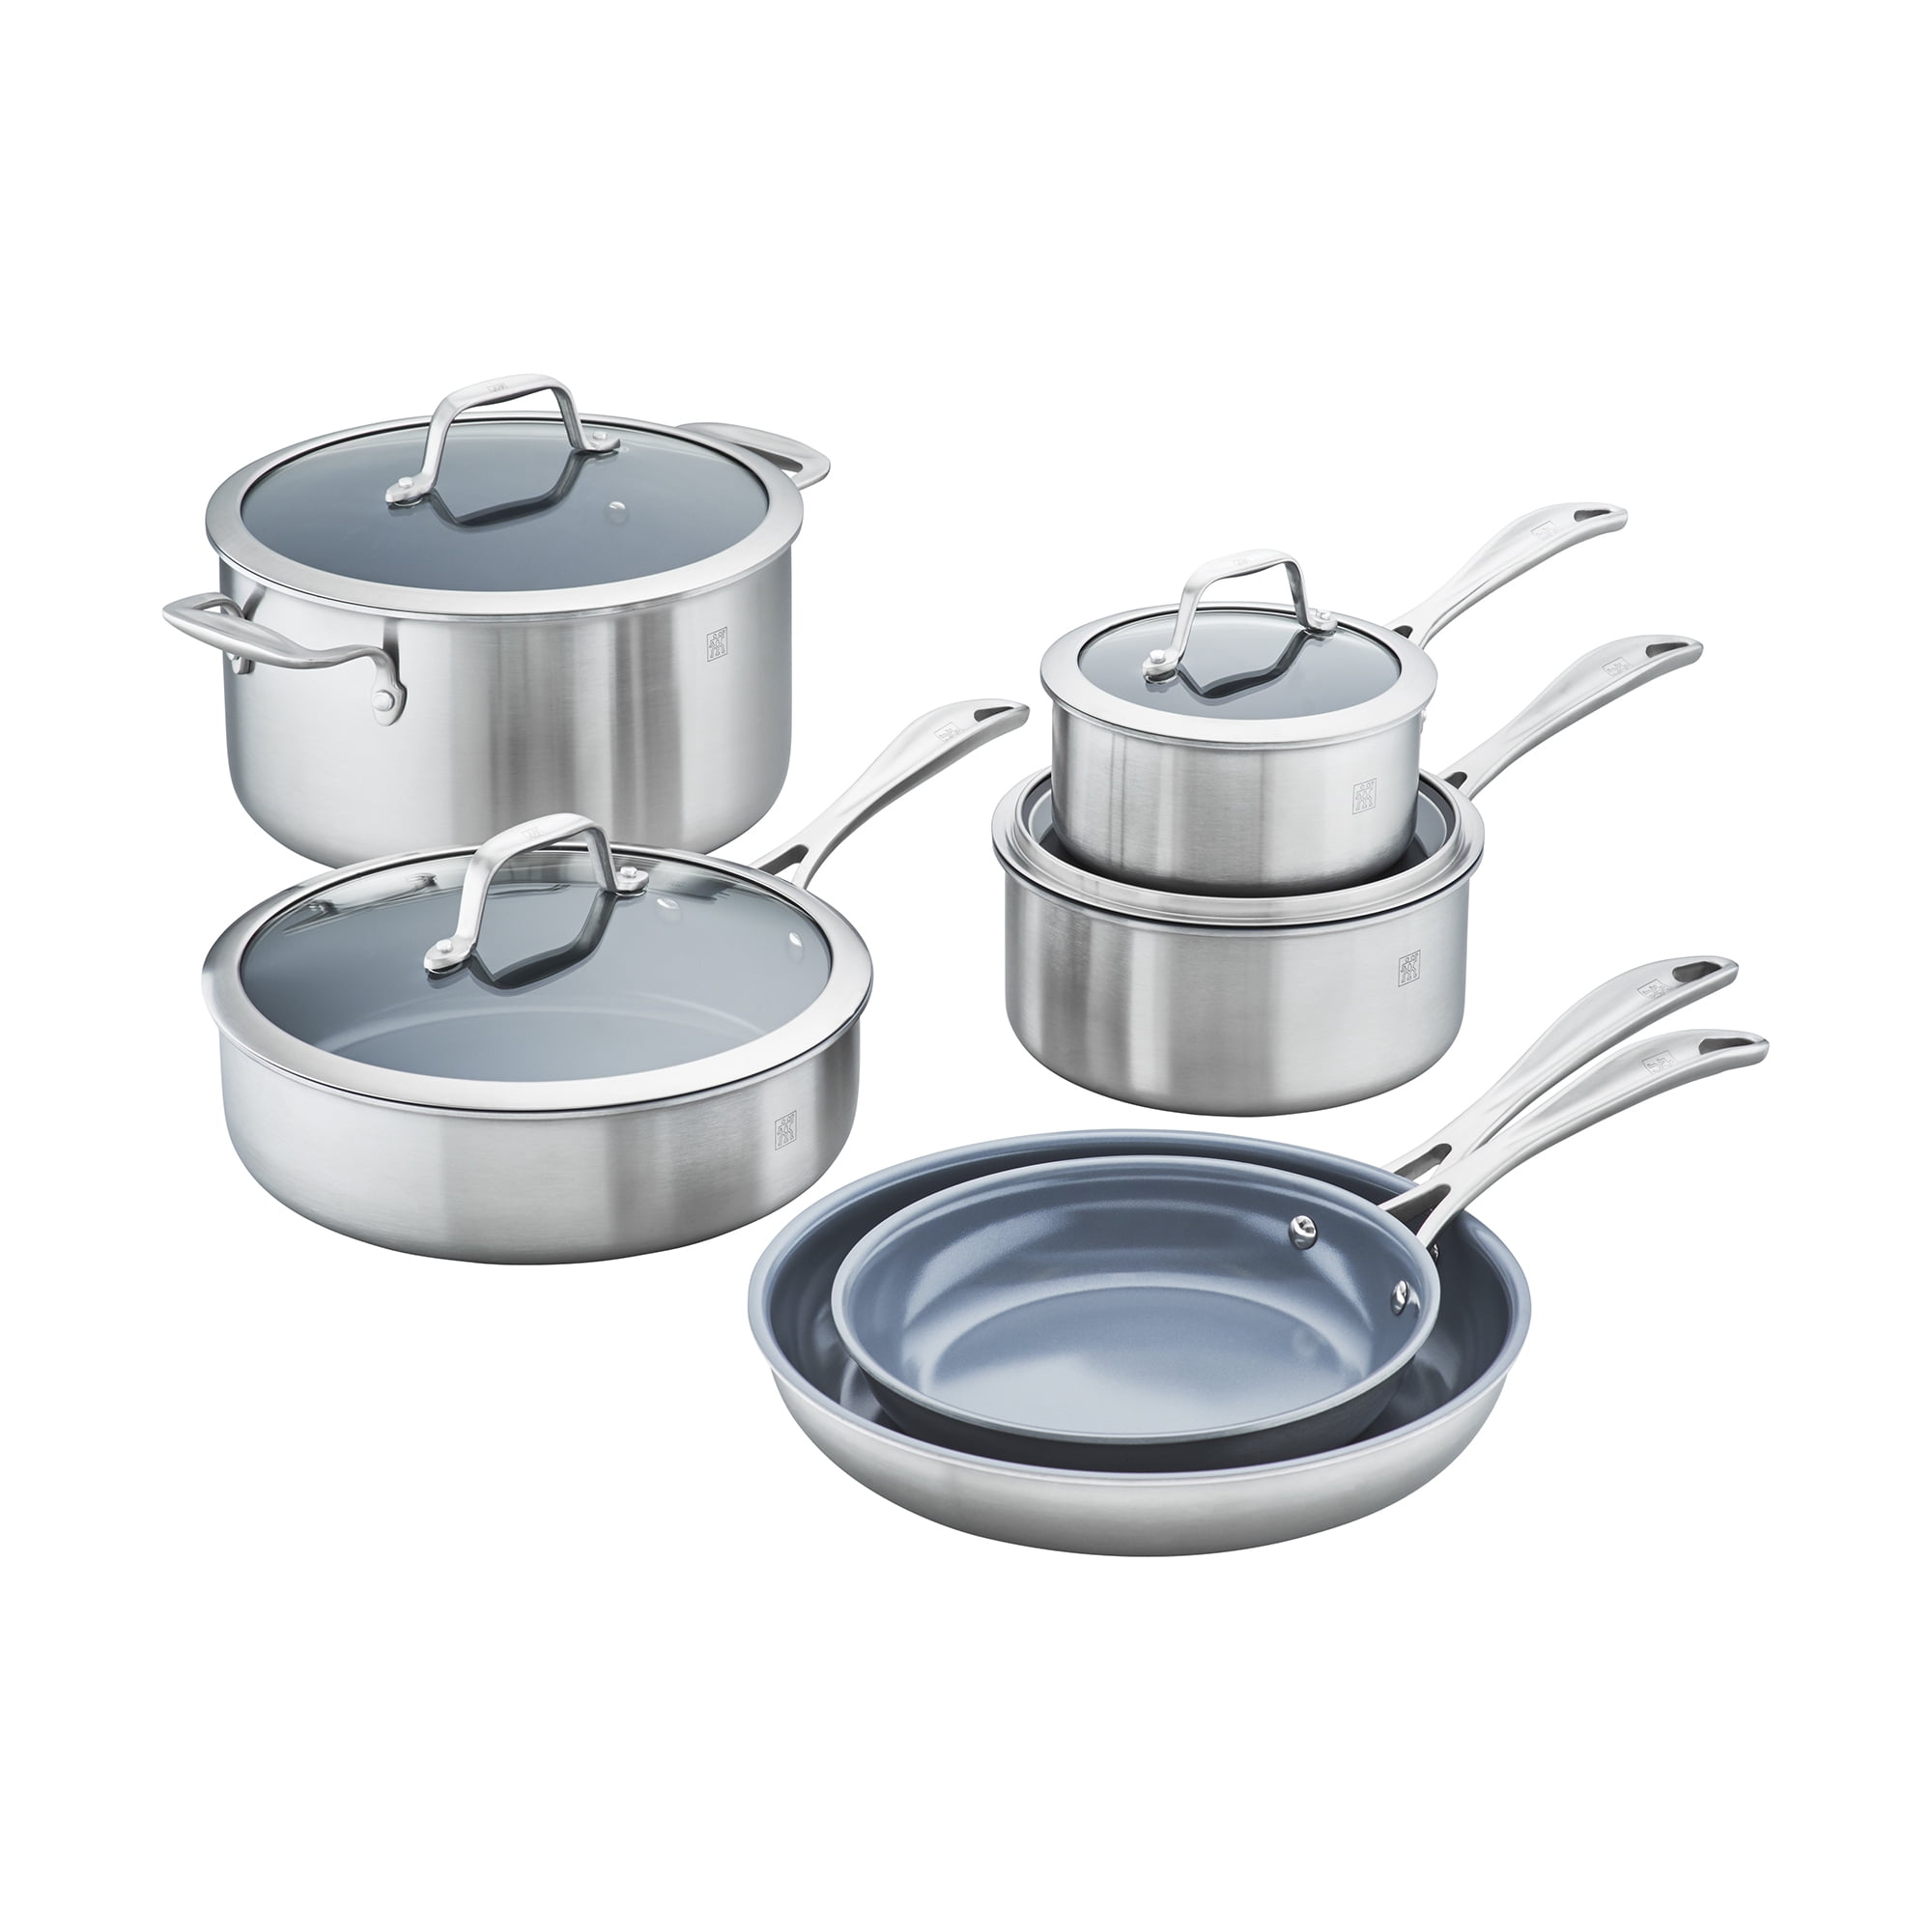  imarku Stainless Steel Pots and Pans Set, 10-Piece Tri